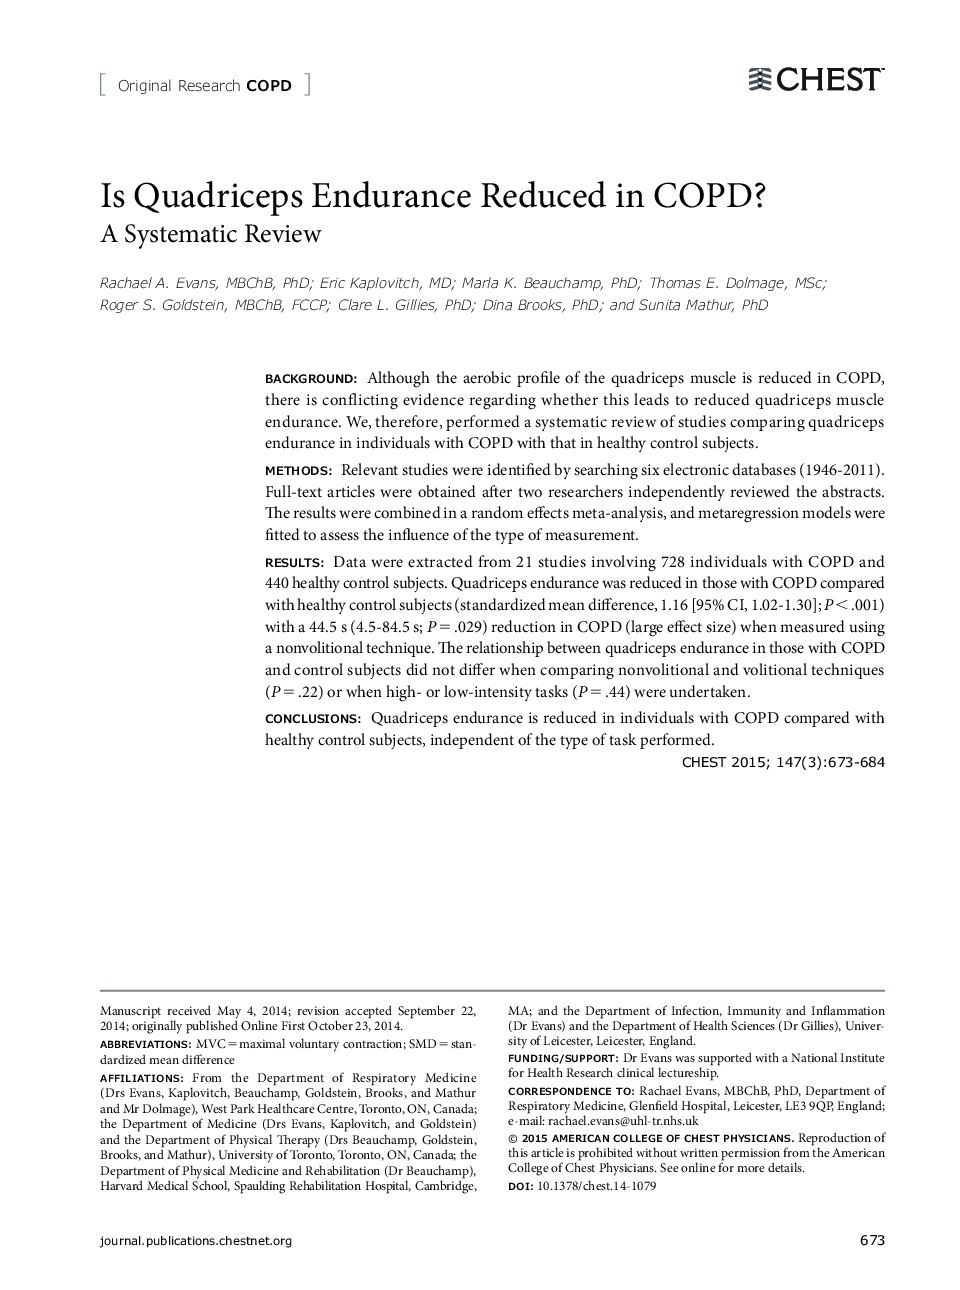 Is Quadriceps Endurance Reduced in COPD? : A Systematic Review